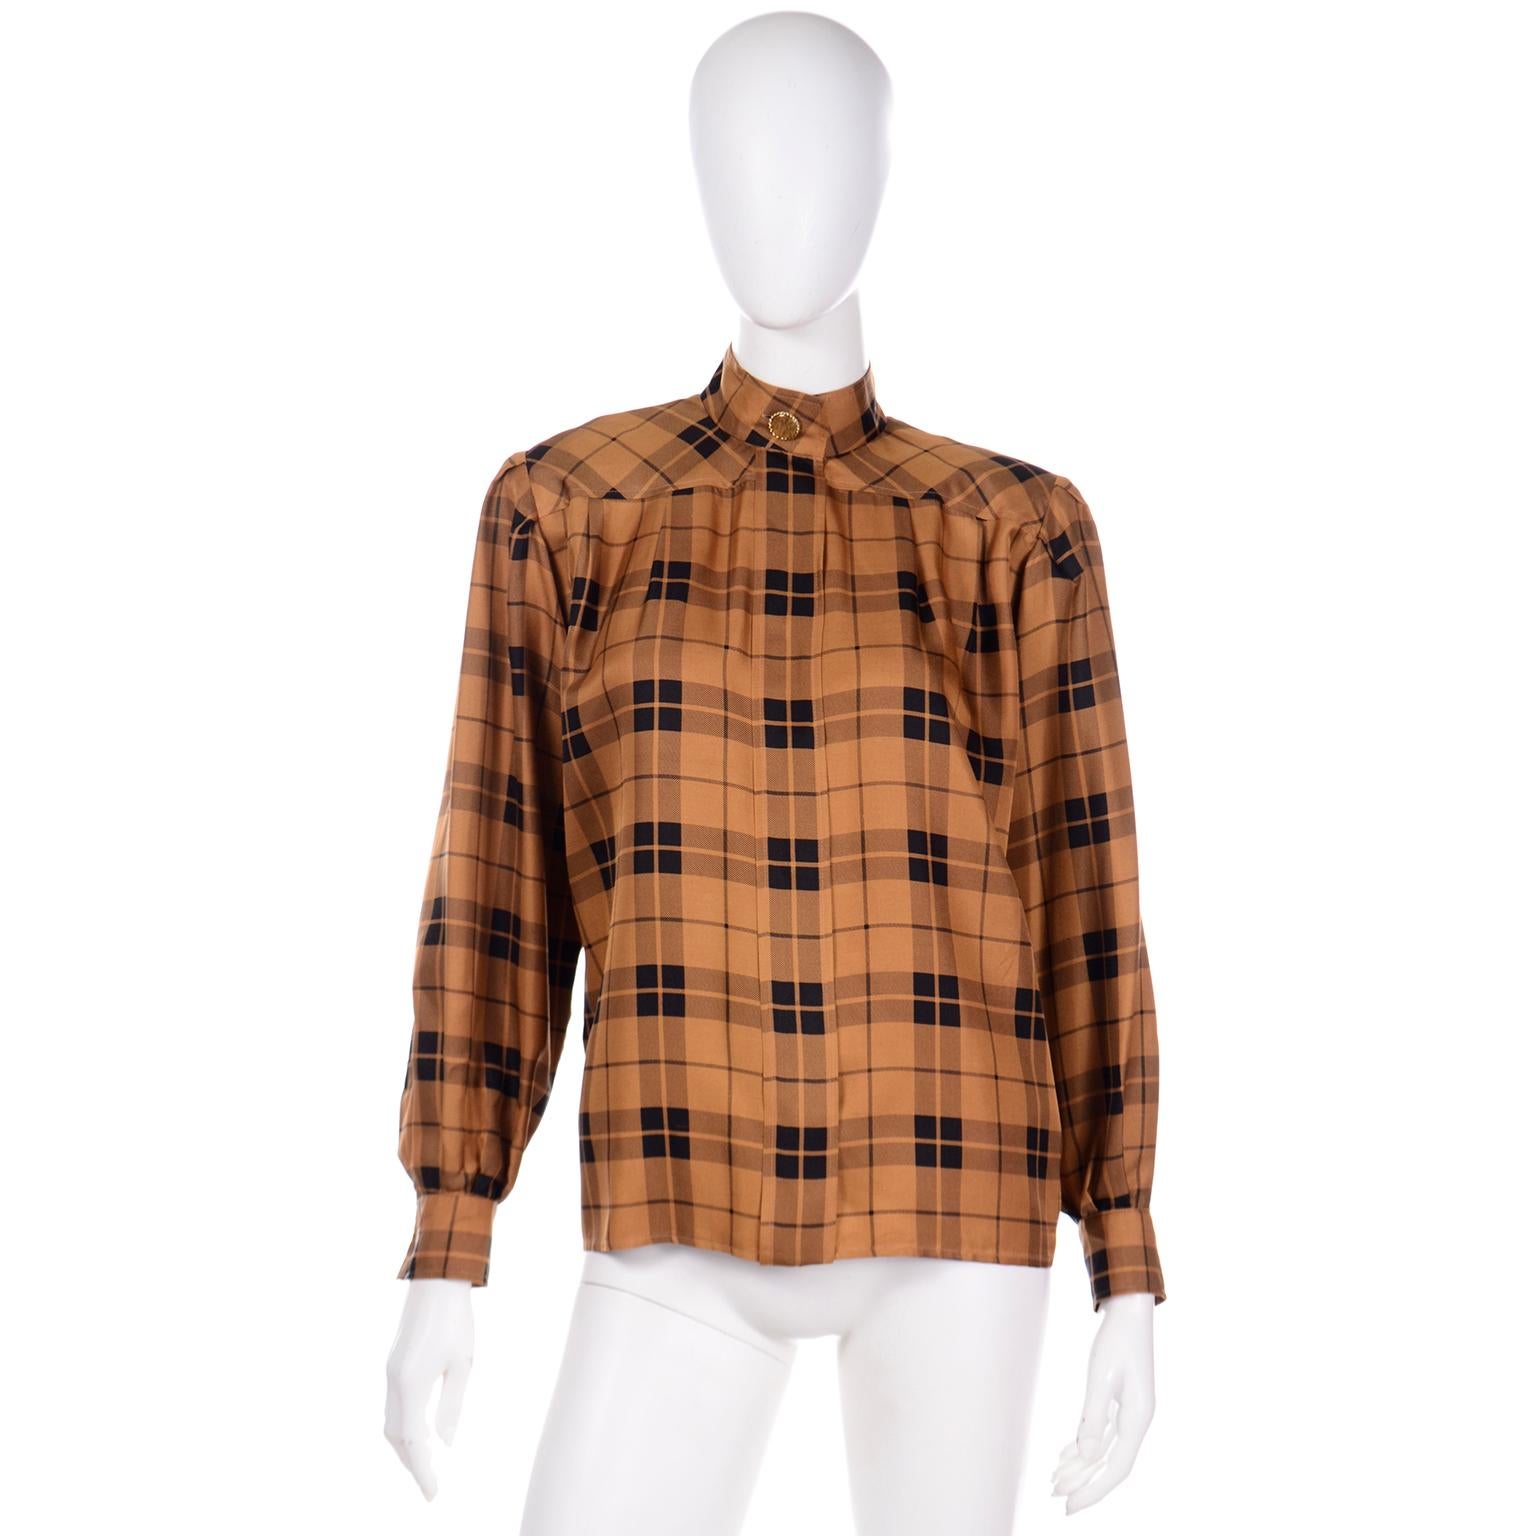 This is a beautiful vintage late 1980's or early 1990's Yves Saint Laurent Rive Gauche copper and black plaid silk blouse. The blouse has a separate sash that can be tied into a knot or bow at the neck.

This lovely blouse has unique gold tone